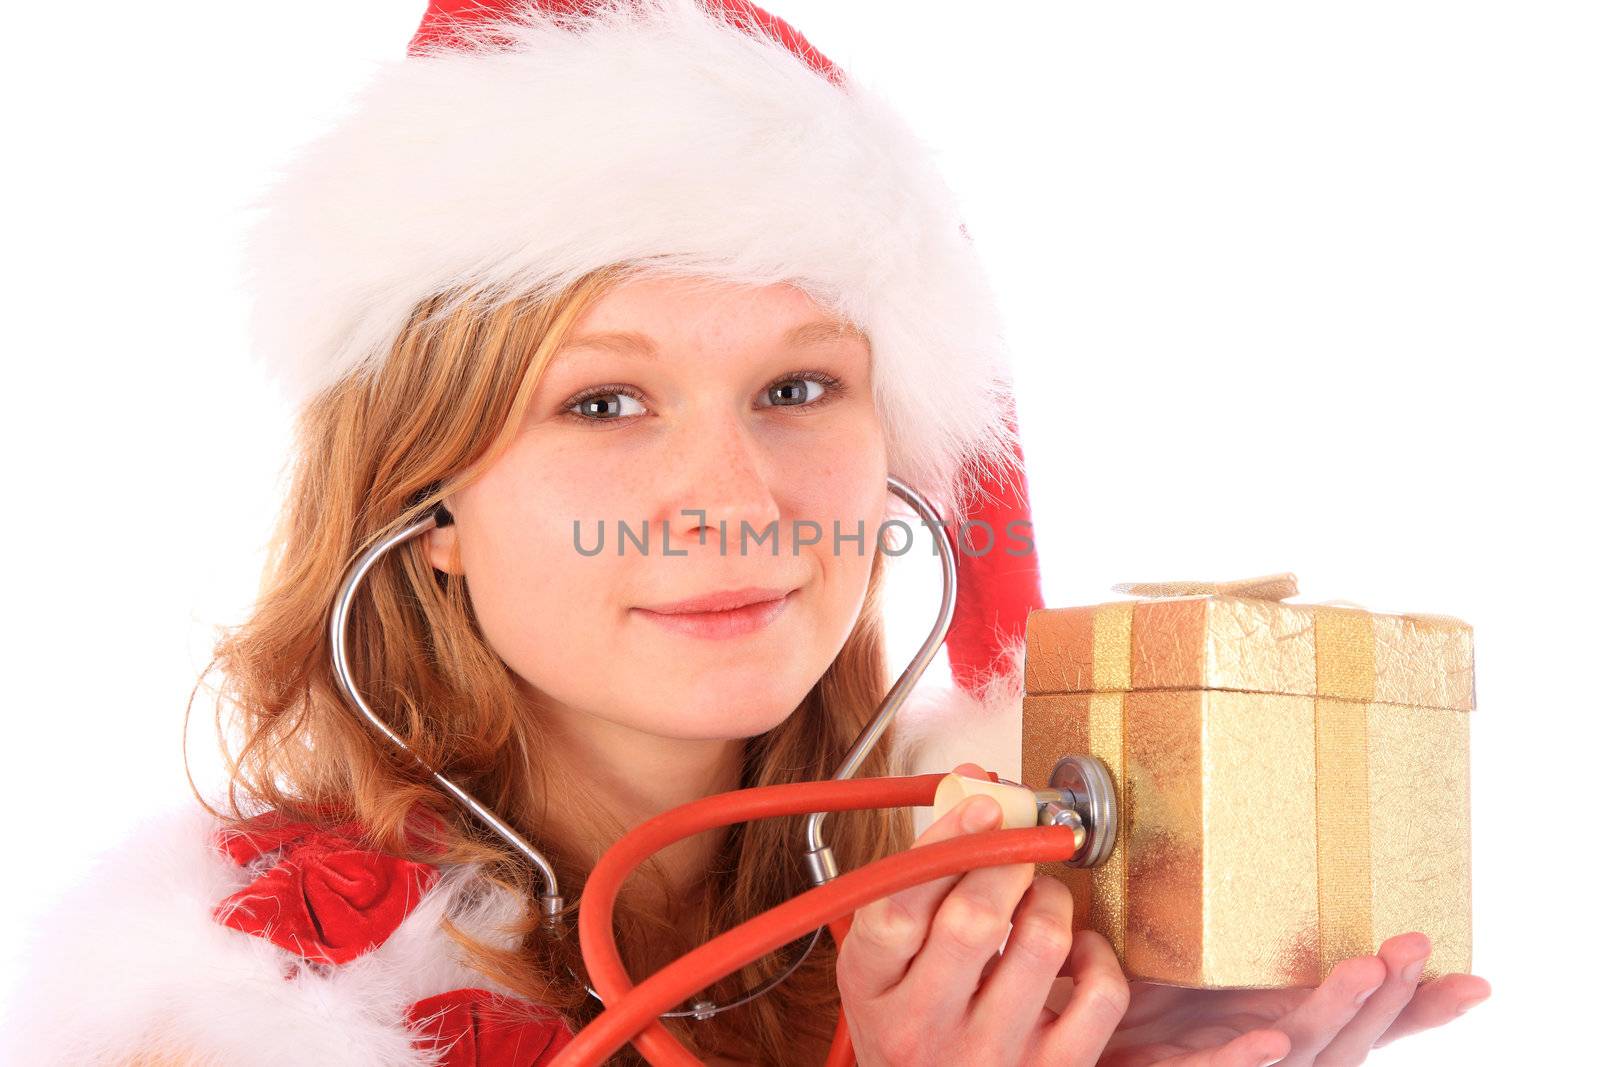 Miss Santa is Giving a Smile While Sounding a Golden Gift Box by PixBox